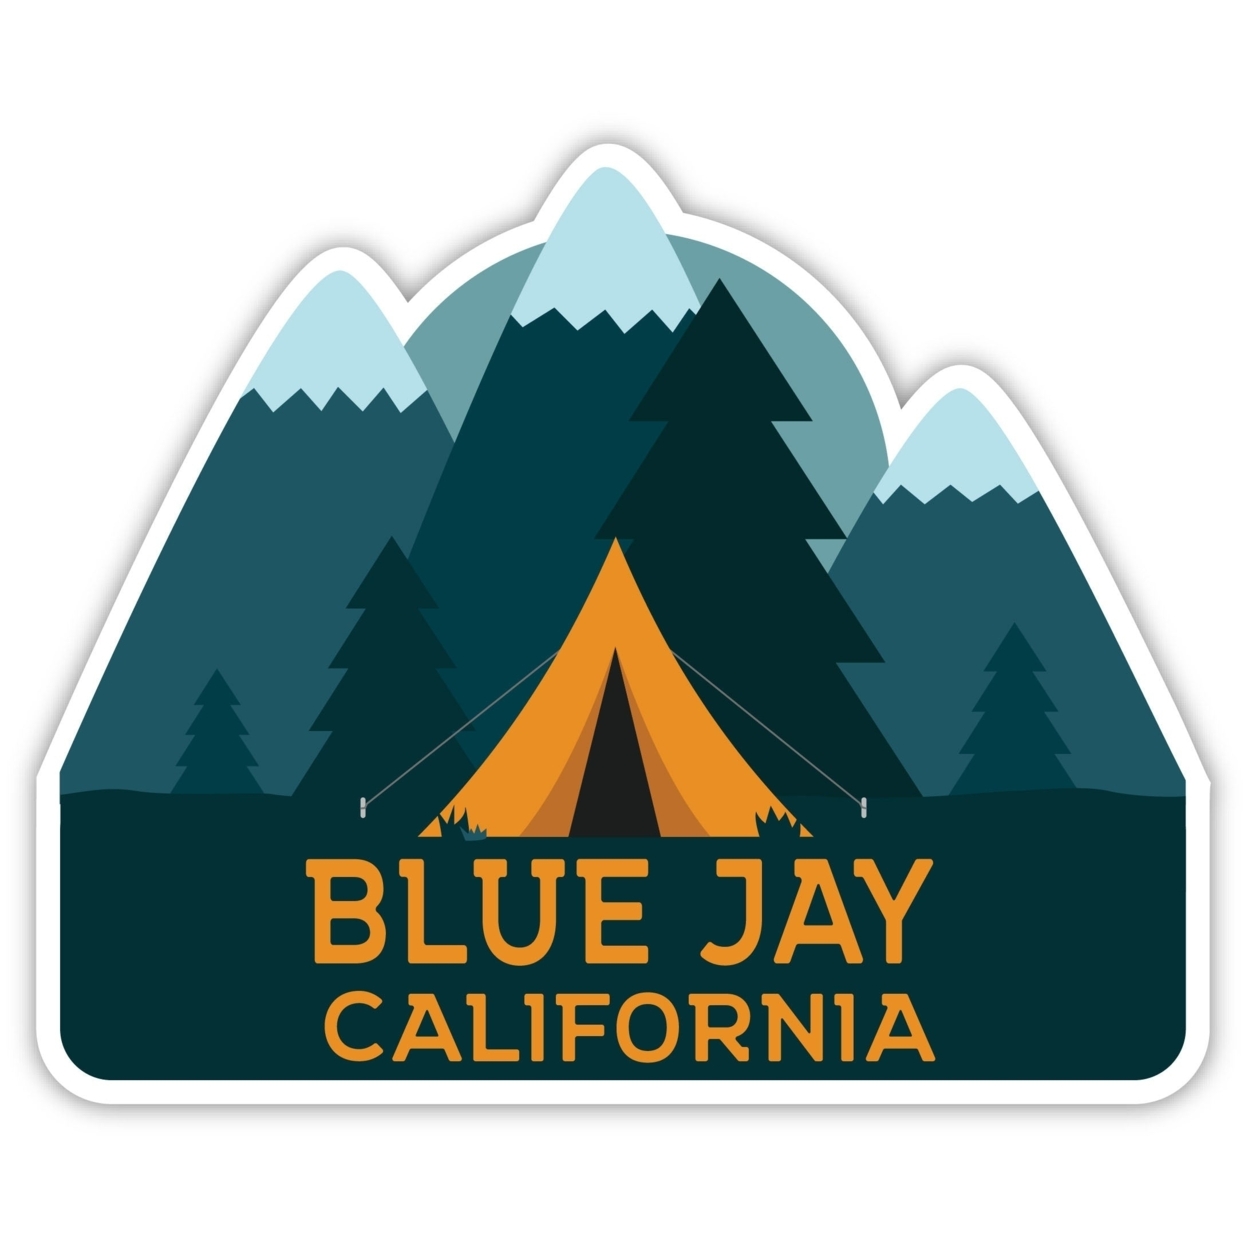 Blue Jay California Souvenir Decorative Stickers (Choose Theme And Size) - 4-Pack, 8-Inch, Tent